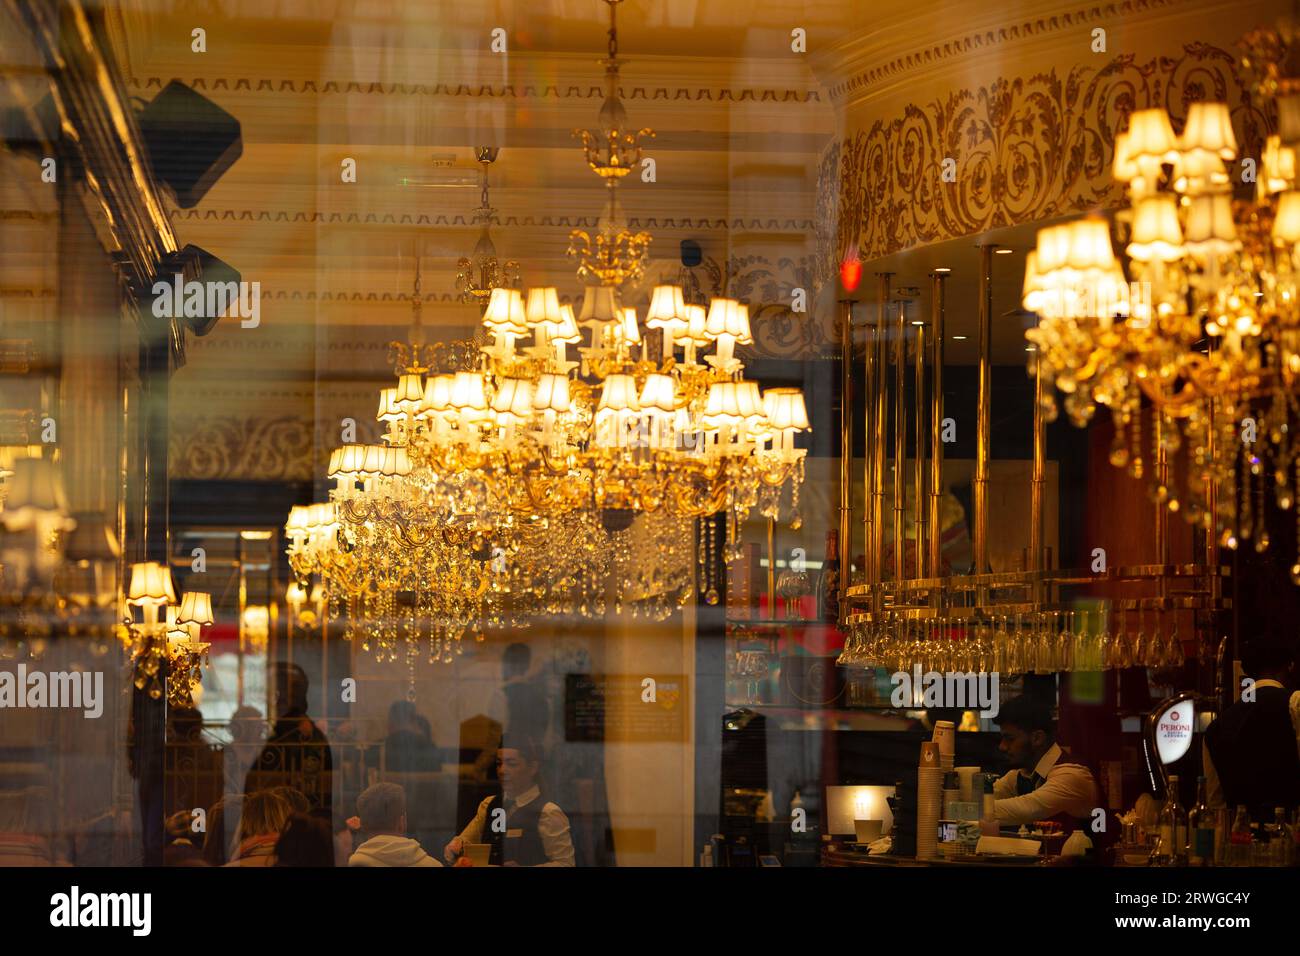 A cafe in central London. Stock Photo